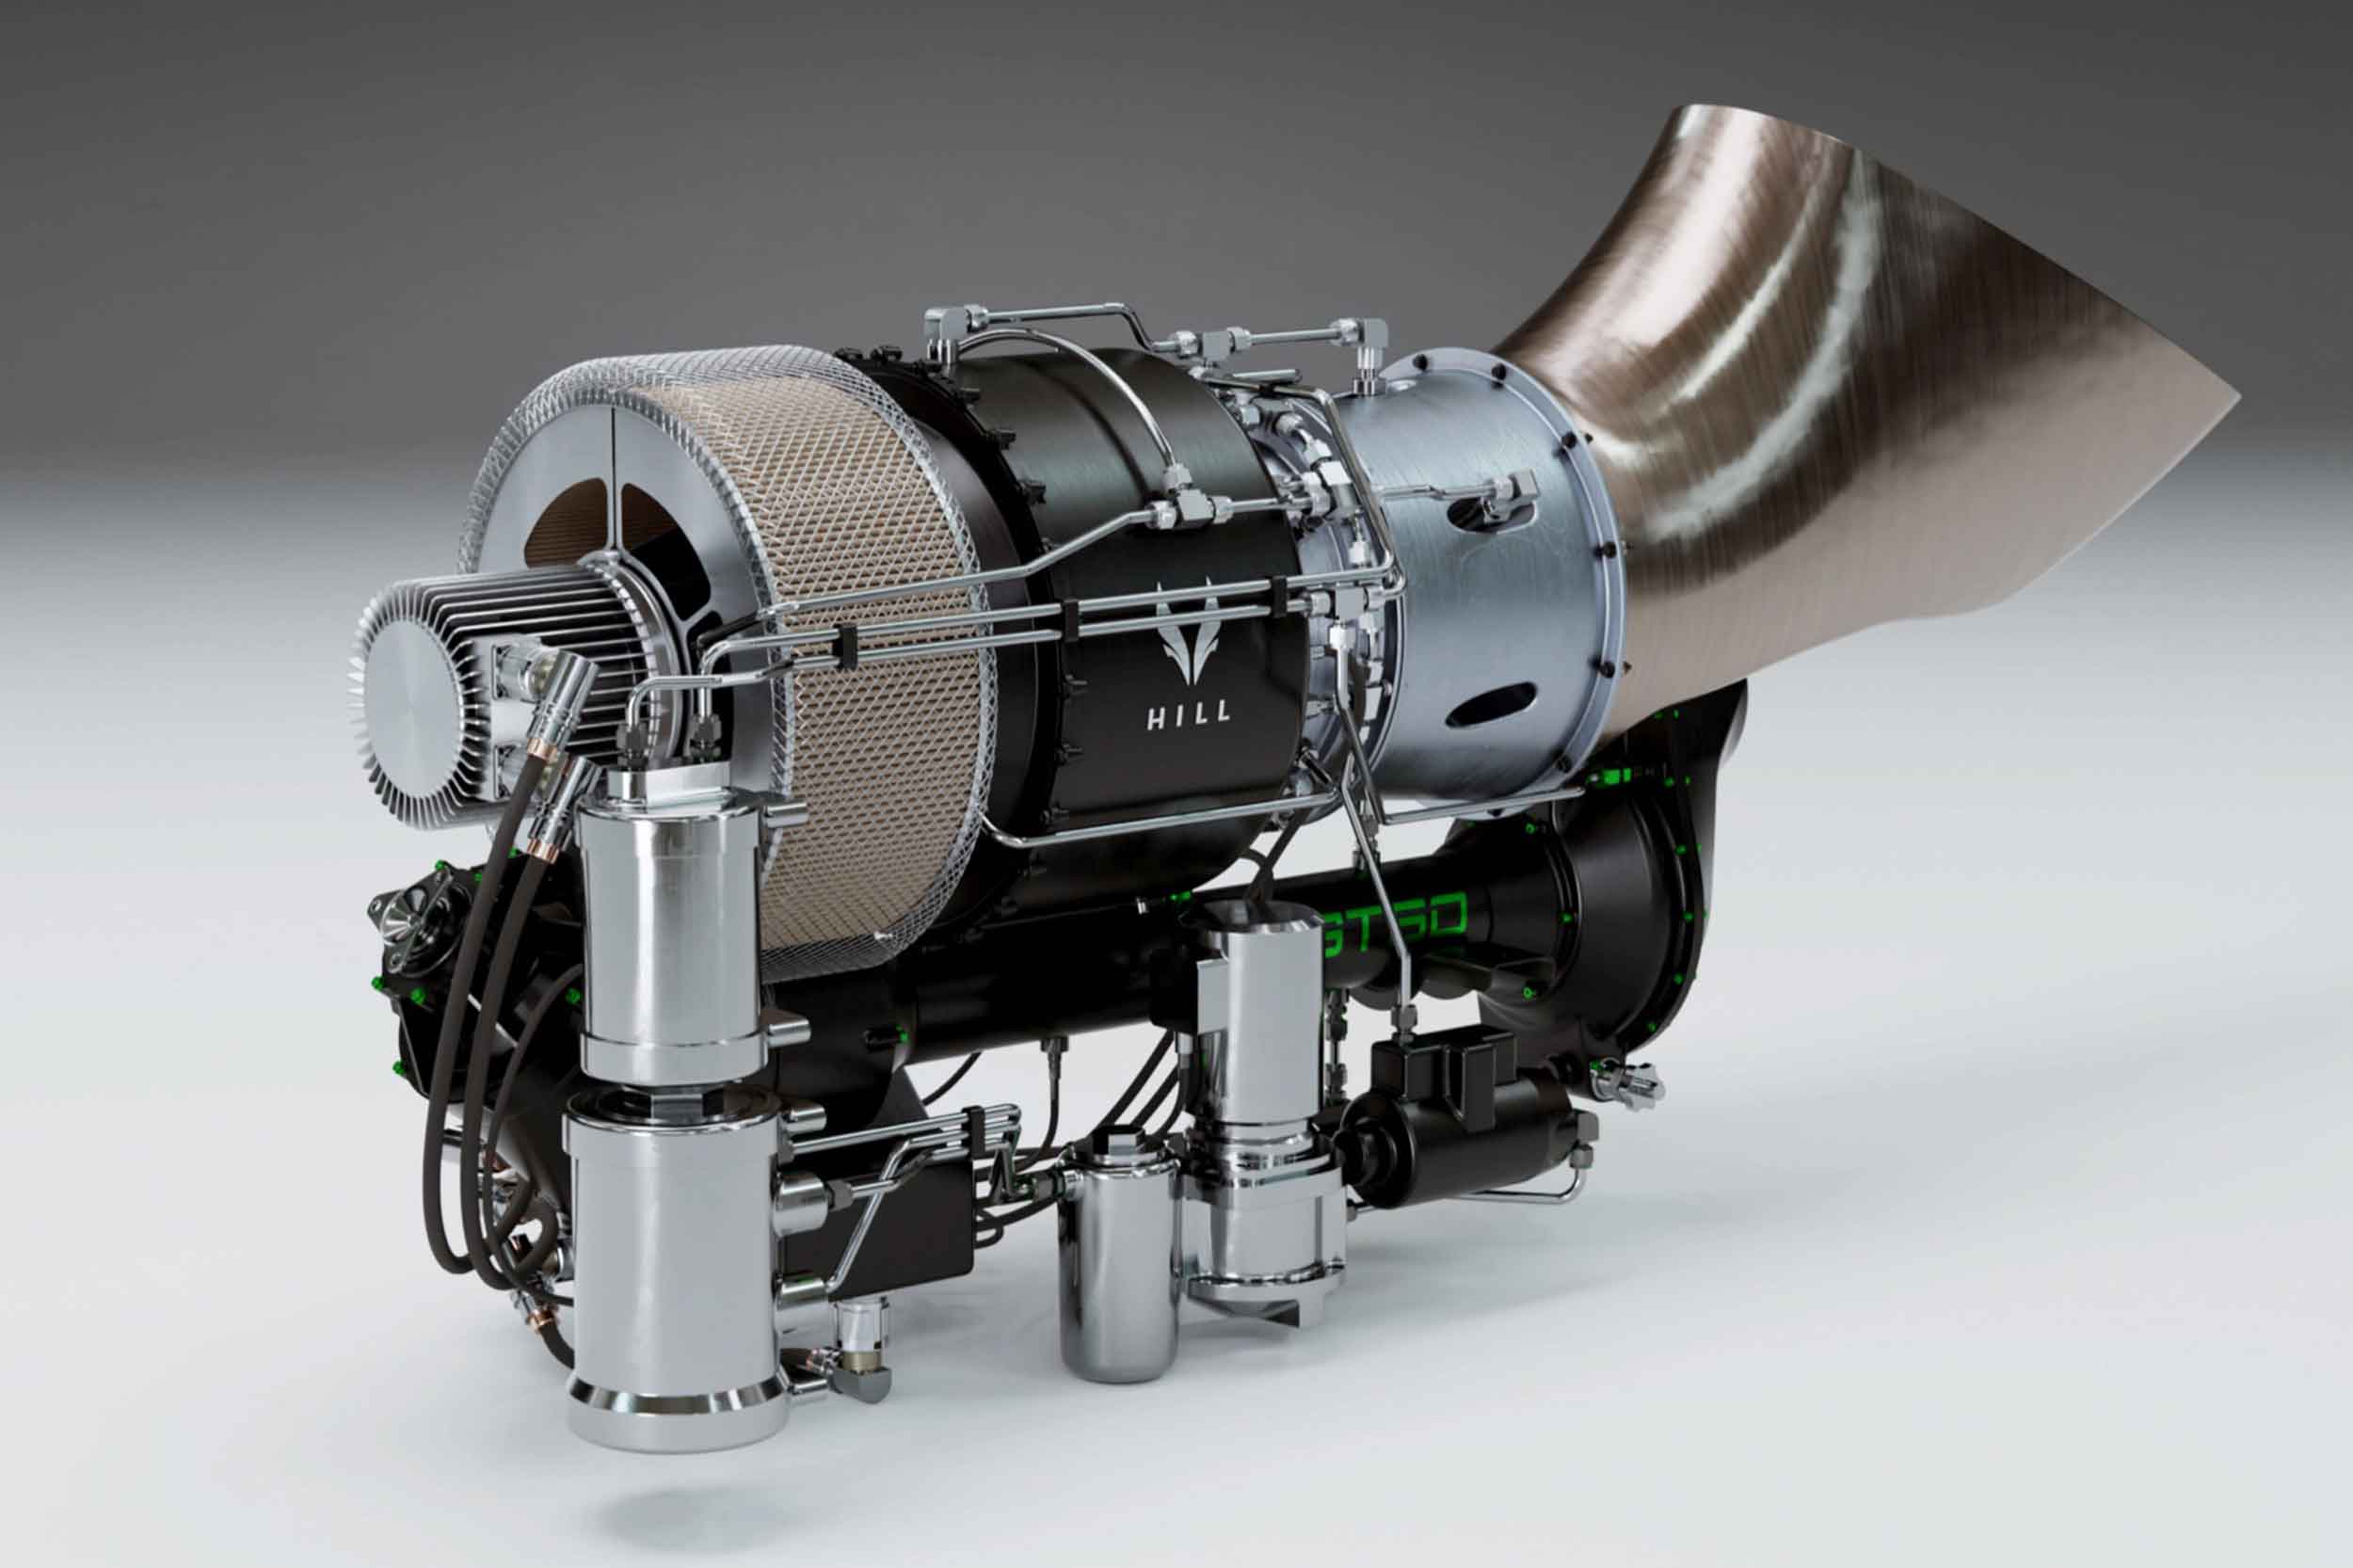 Hill's own engine, the GT50 turbine, said to be able to use Sustainable Aviation Fuel